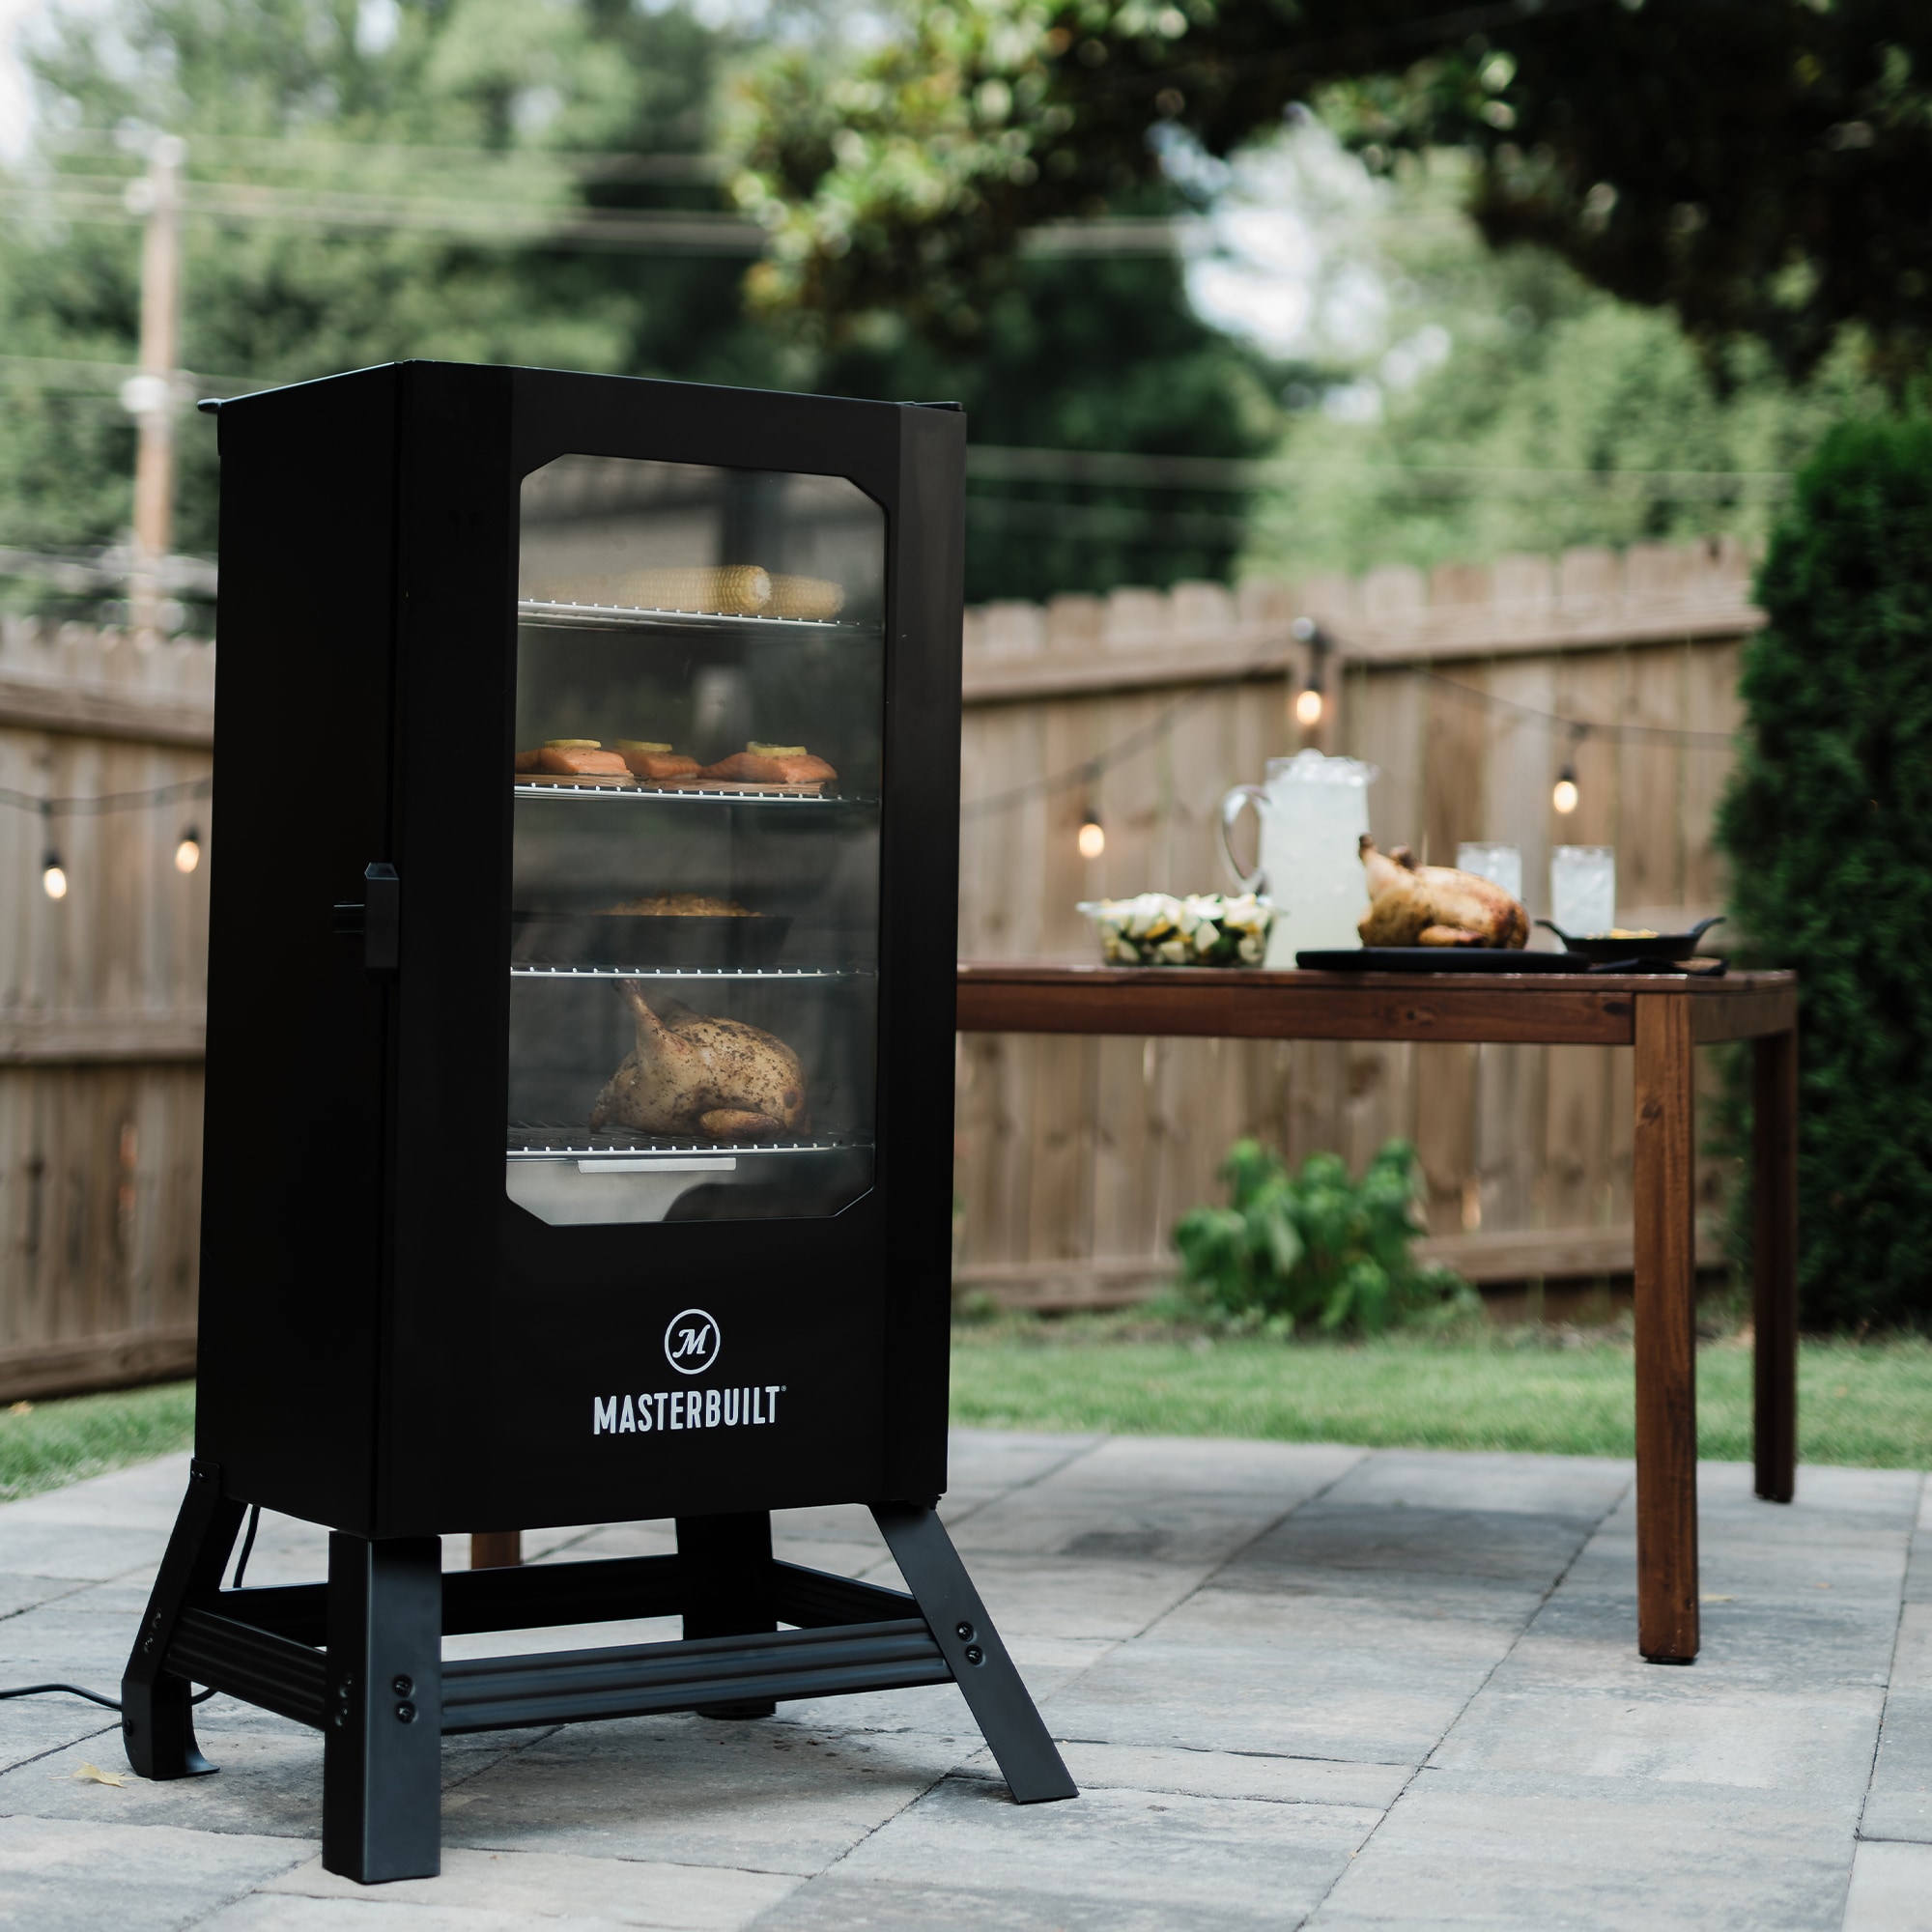 Masterbuilt Outdoor Barbecue 30 Digital Electric BBQ Meat Smoker Grill,  Black 